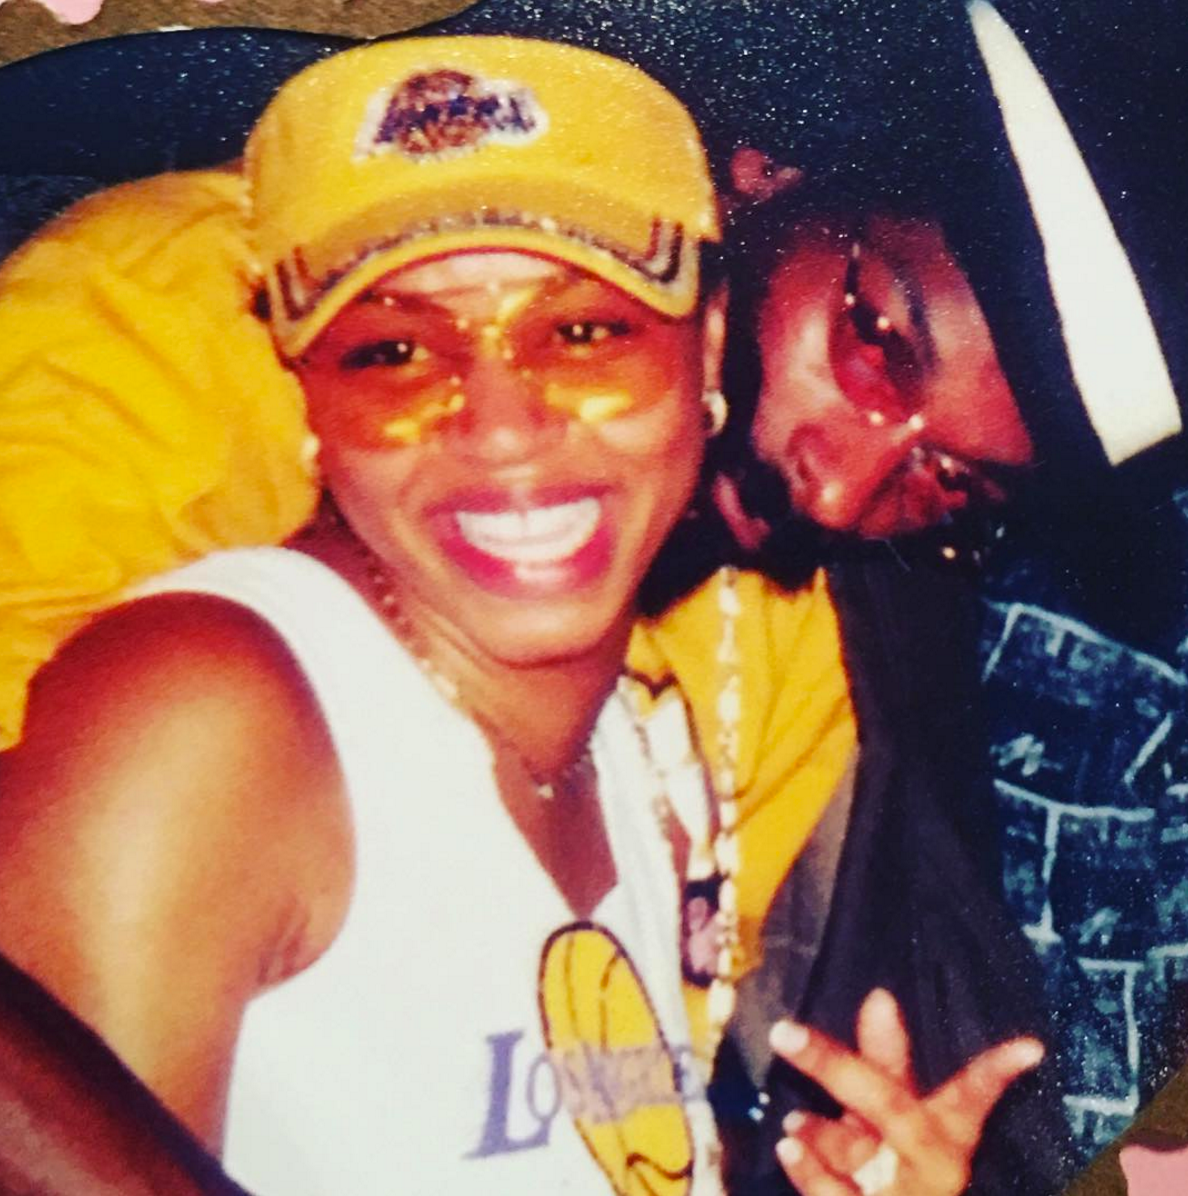 Photographic Proof That Snoop Dogg and His Wife Shante's Love Is Picture Perfect
